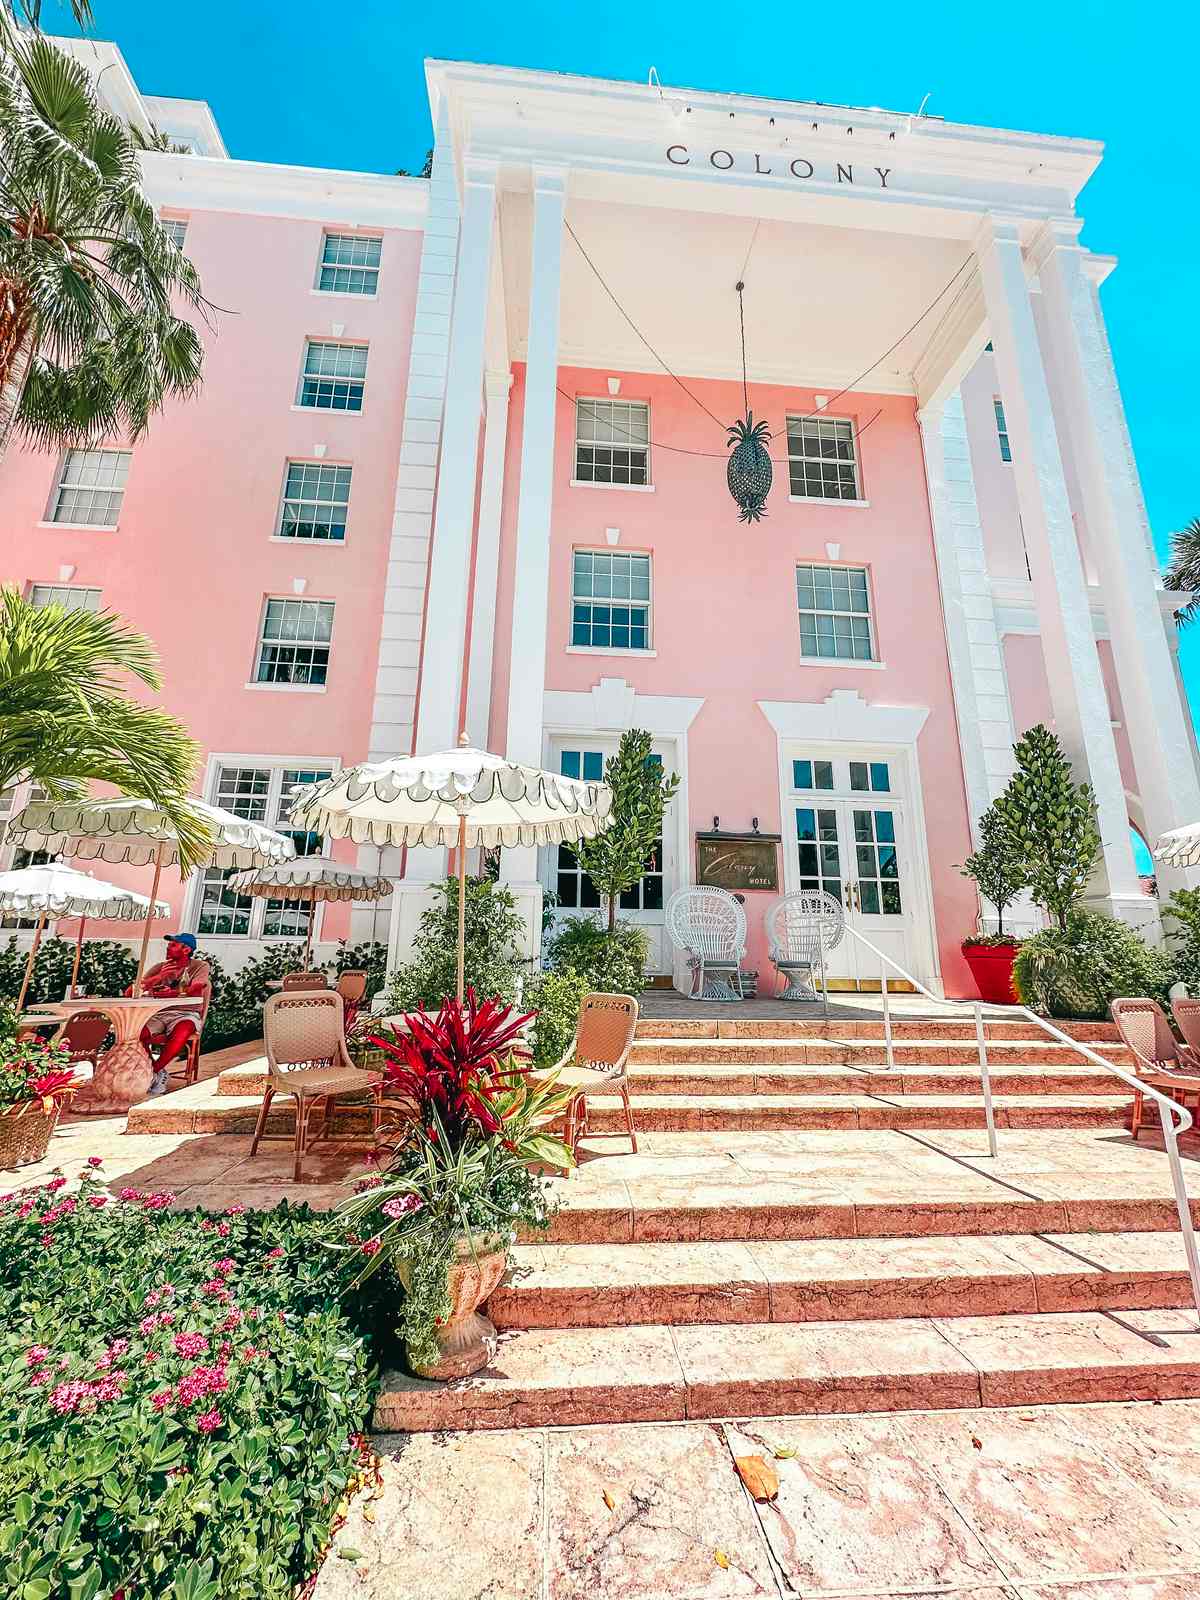 Entrance to The Colony Hotel in Palm Beach